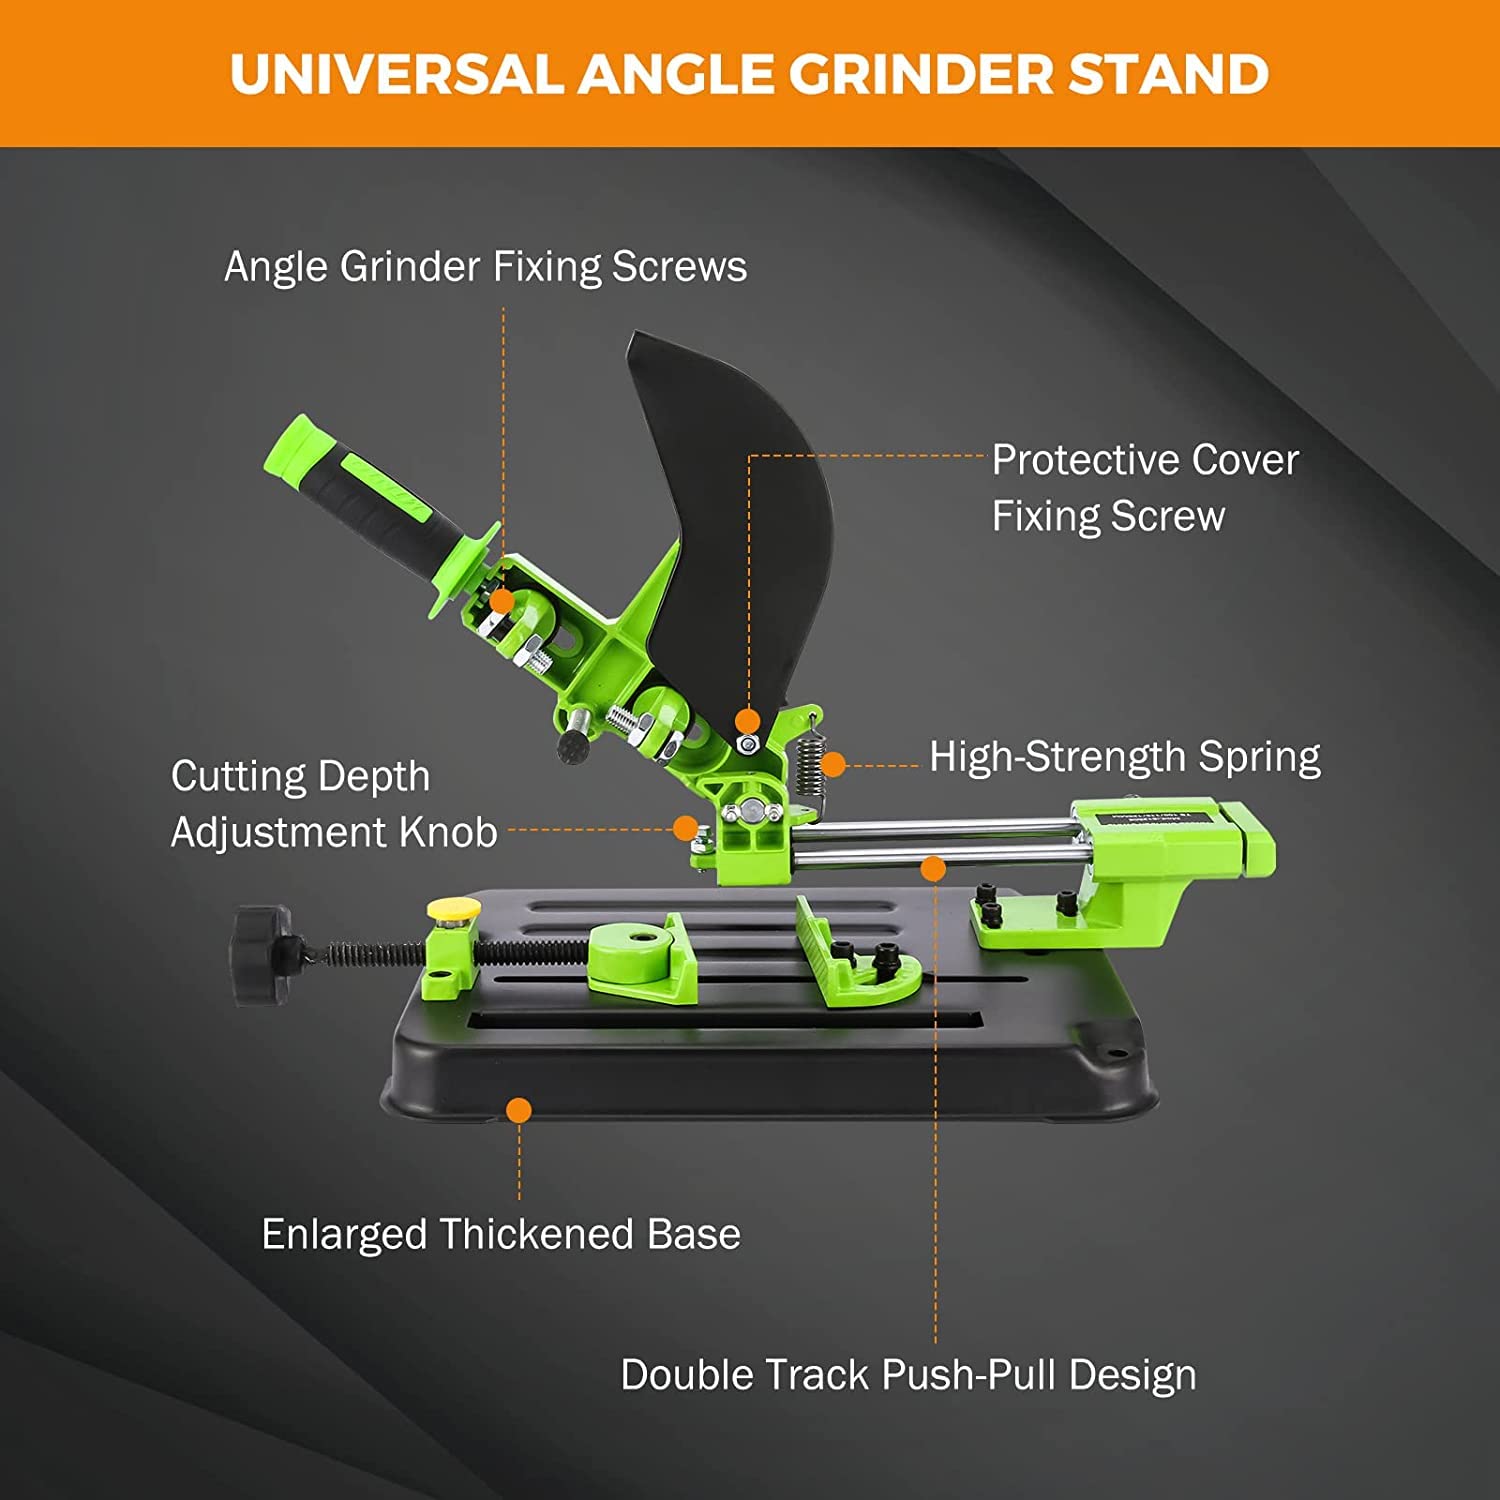 CHESTON Angle grinder sliding stand/Multi-functional sliding rod Bracket universal compatibility with 4” / 5” Grinding Cutting Machine.